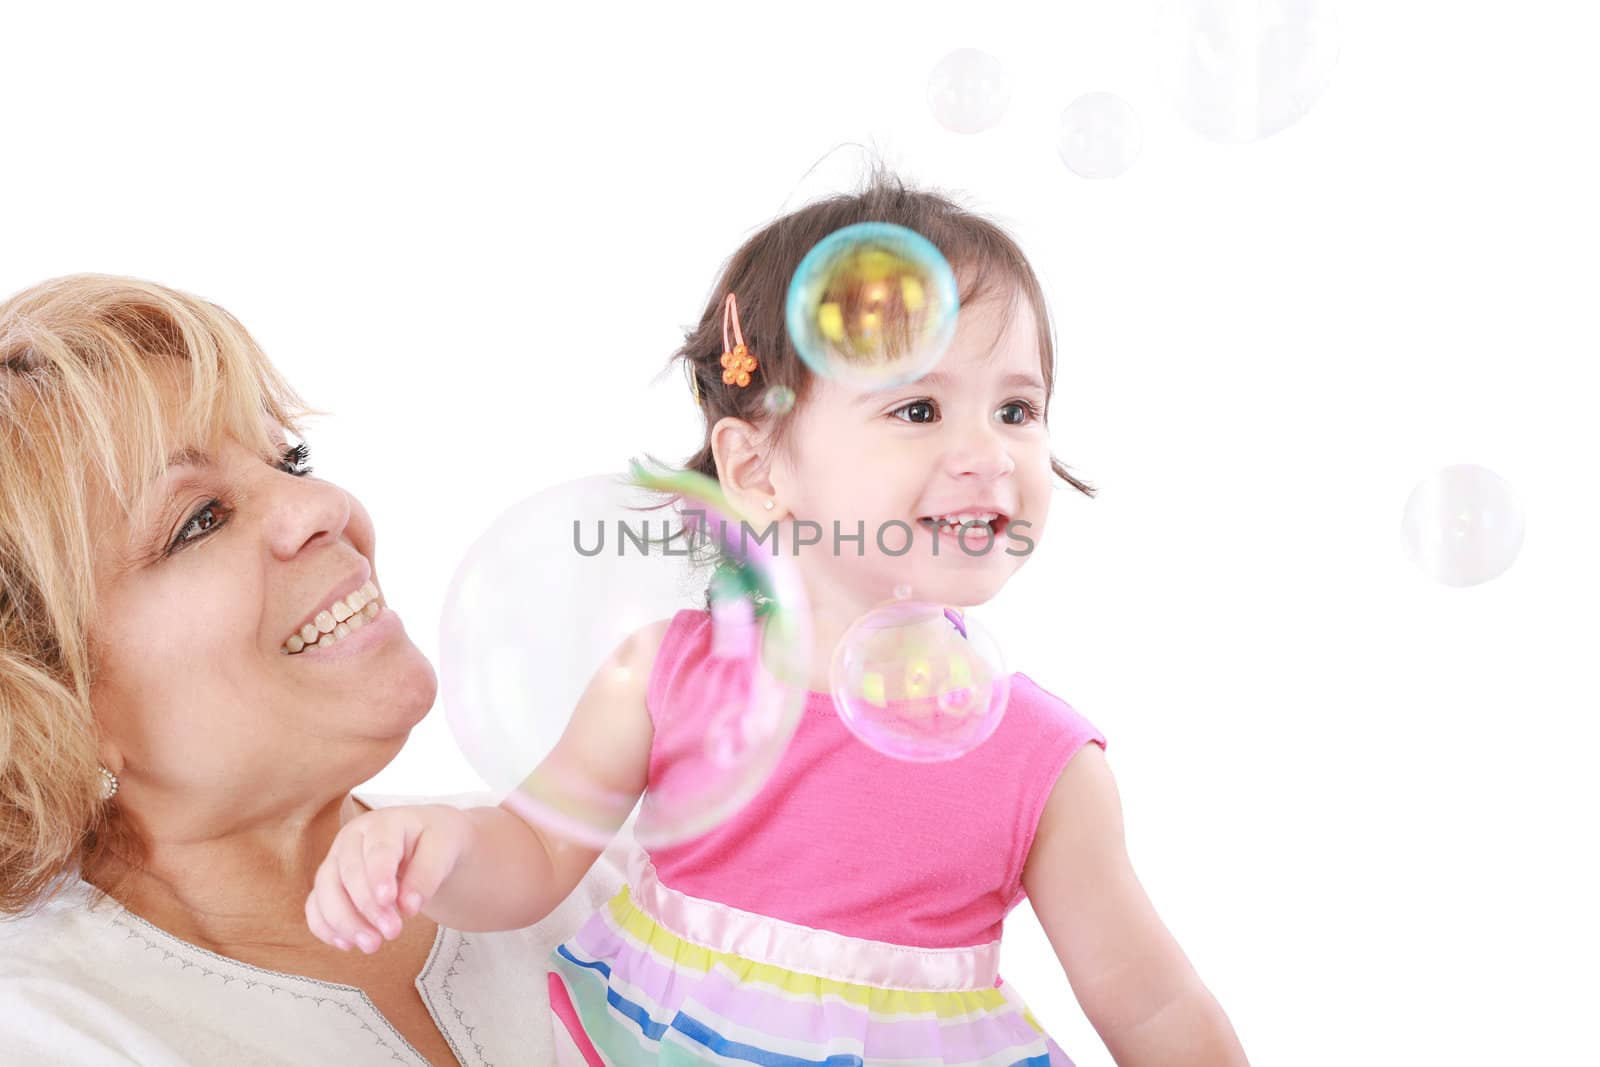 Aunt and a little girl enjoy looking at bubbles floating in the by dacasdo